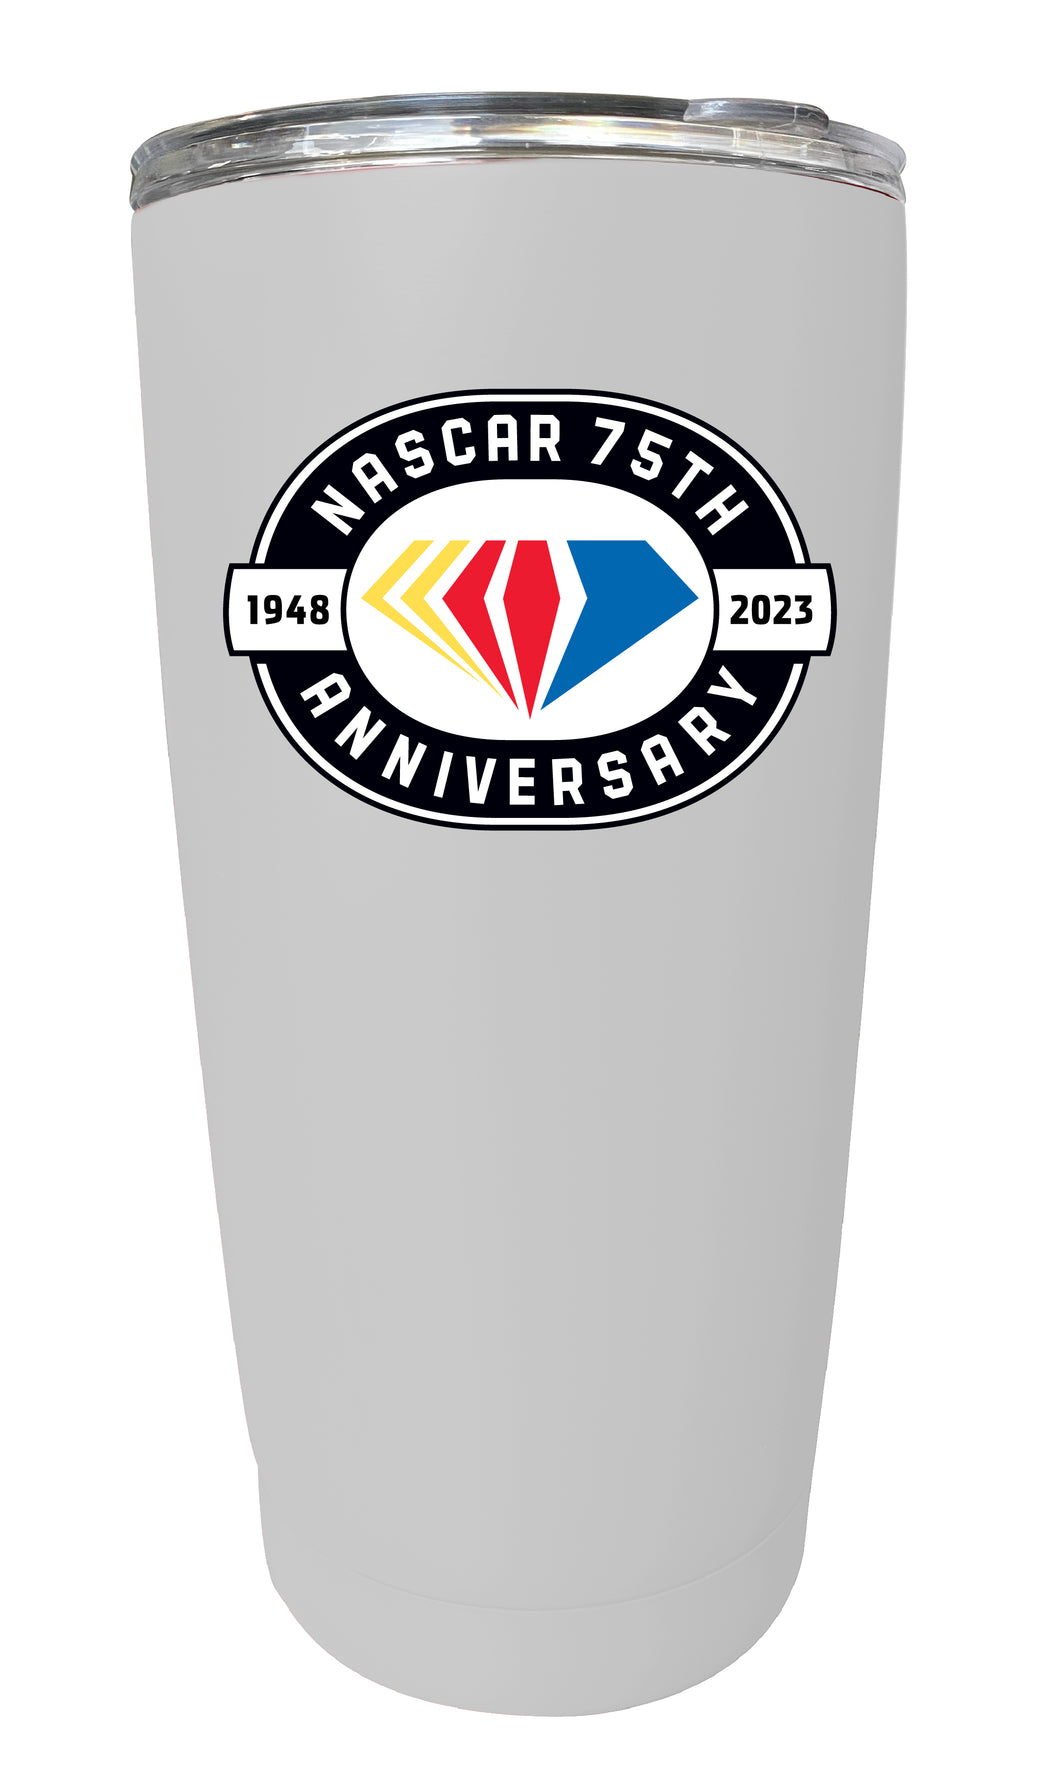 NASCAR 75 Year Anniversary Officially Licensed 16oz Stainless Steel Tumbler